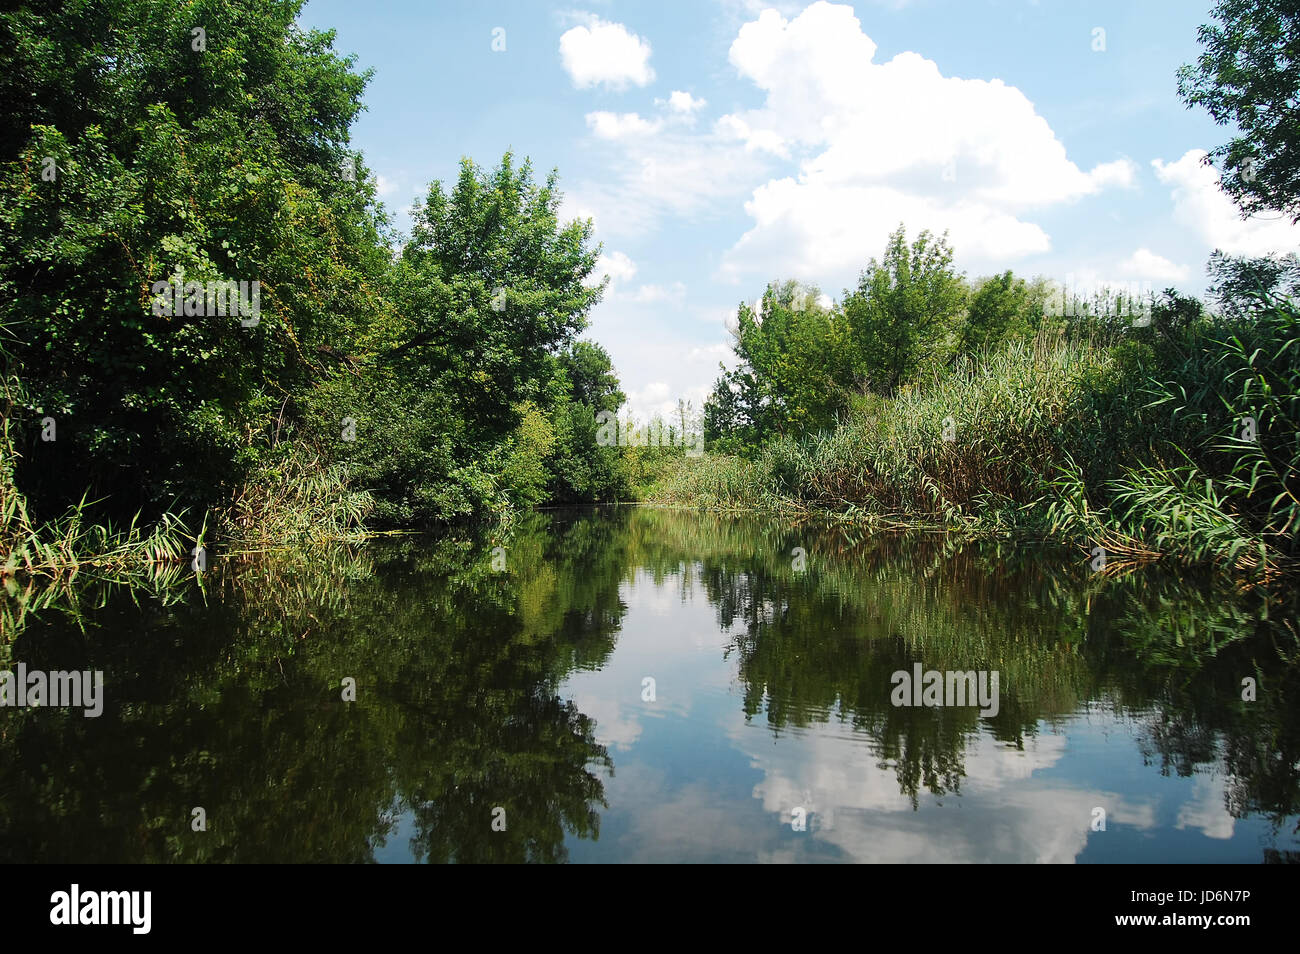 Summer floodplain river with jungles of reeds and trees. Summer water scape. Stock Photo